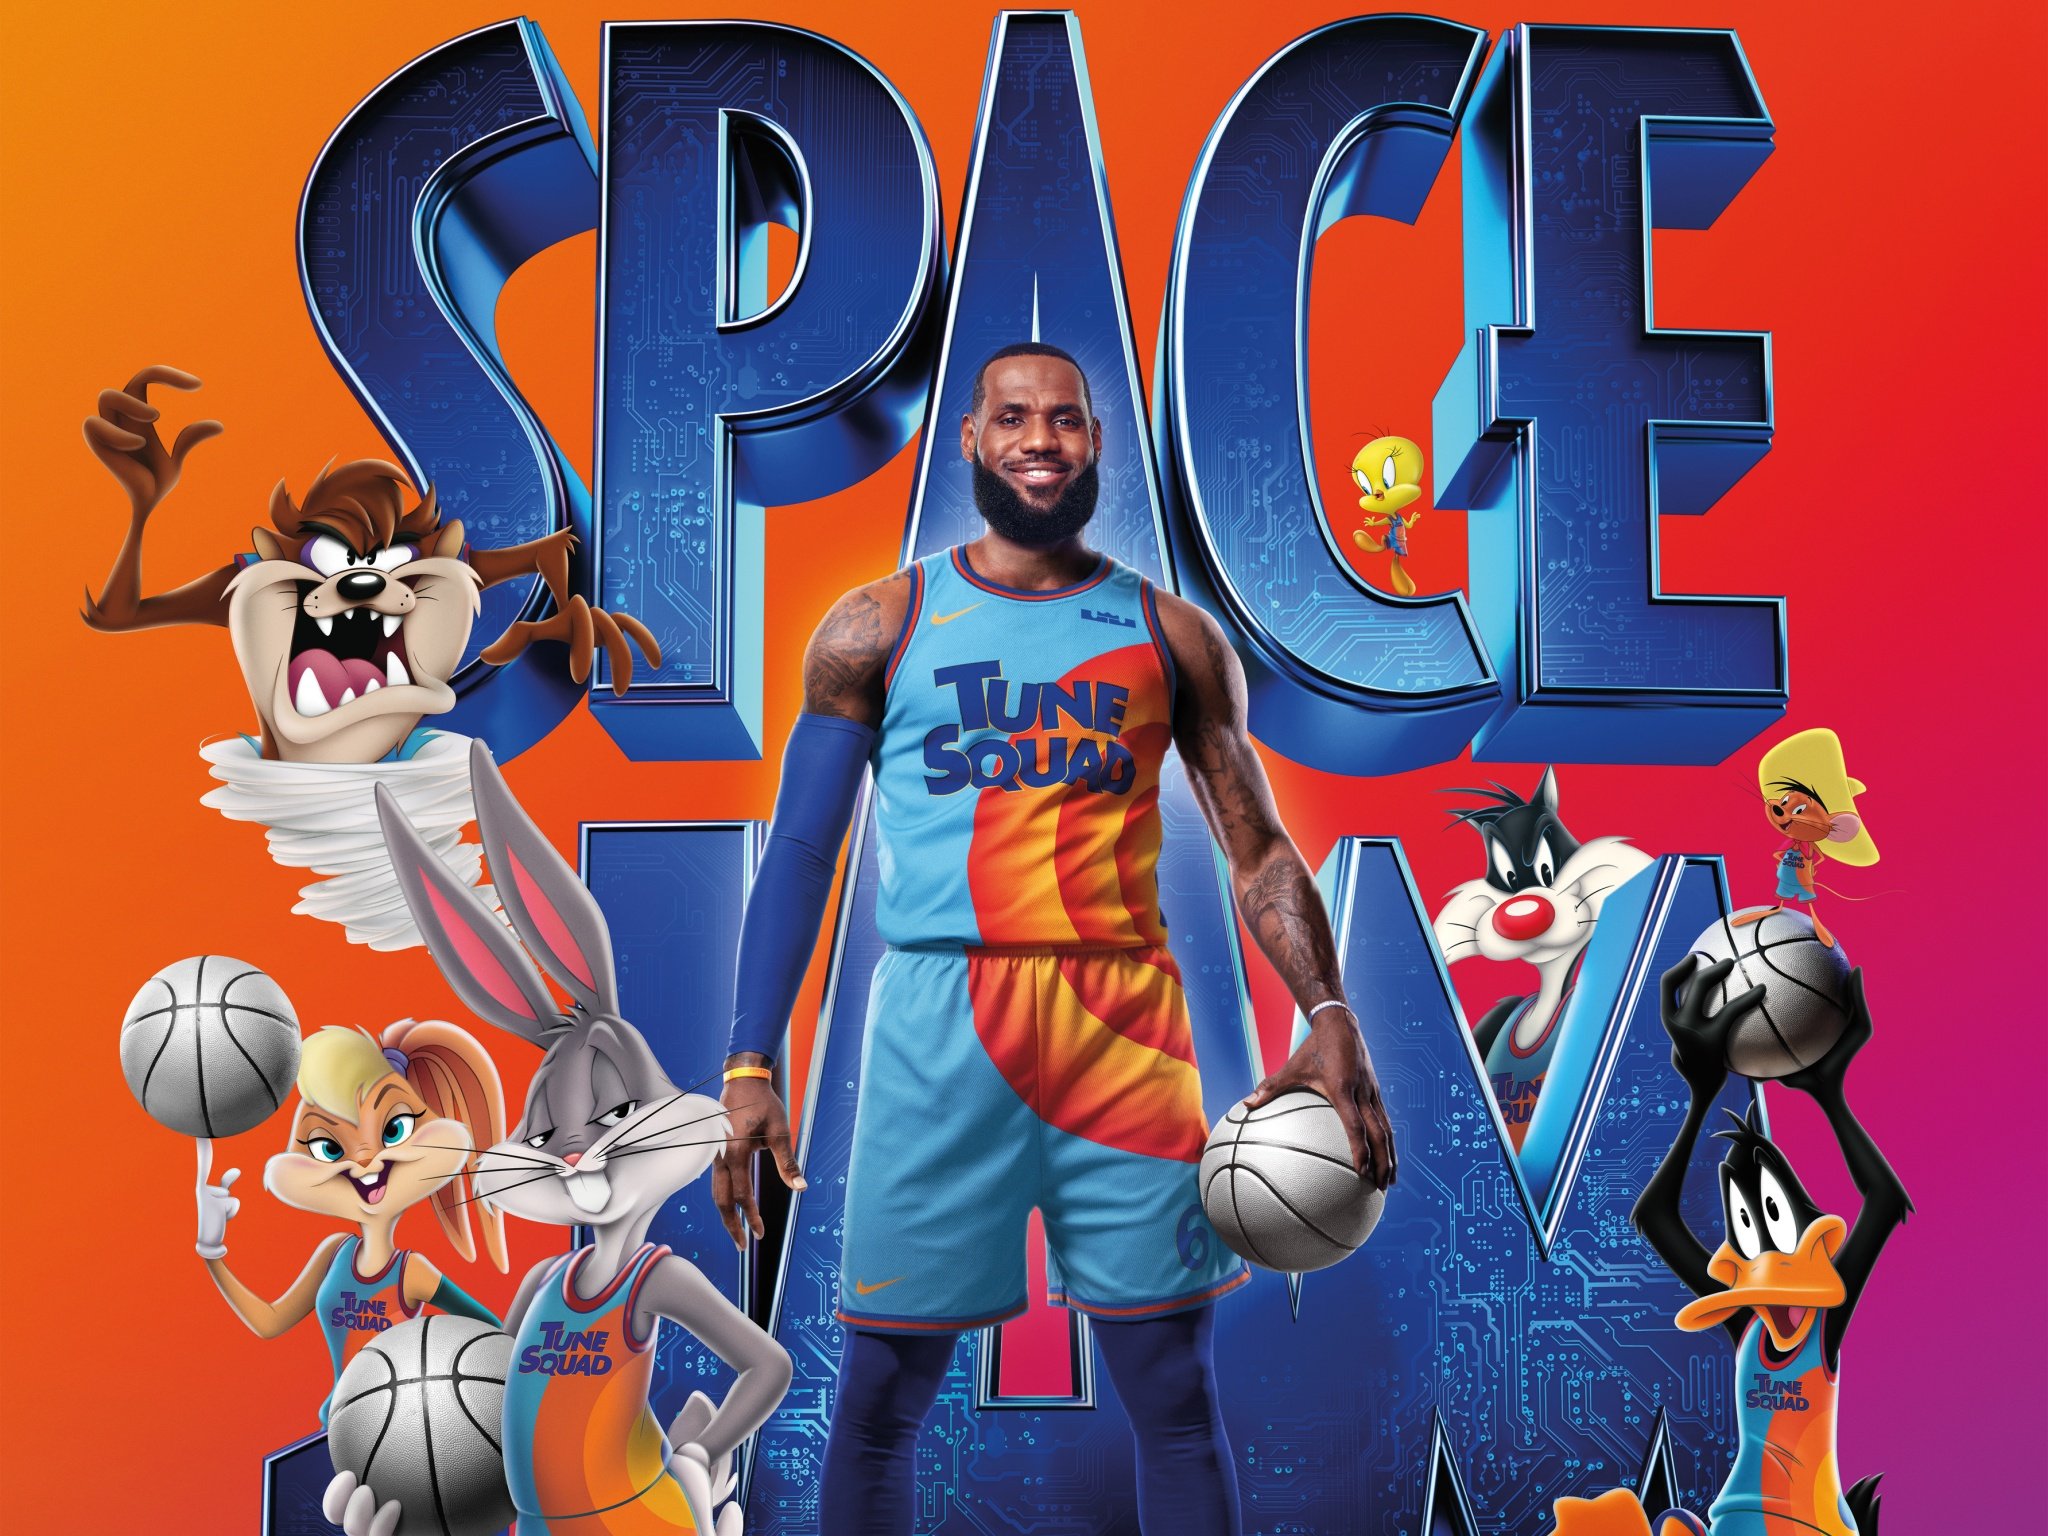 Space Jam: A New Legacy Wallpaper 4K, 2021 Movies, Comedy, LeBron James, Movies